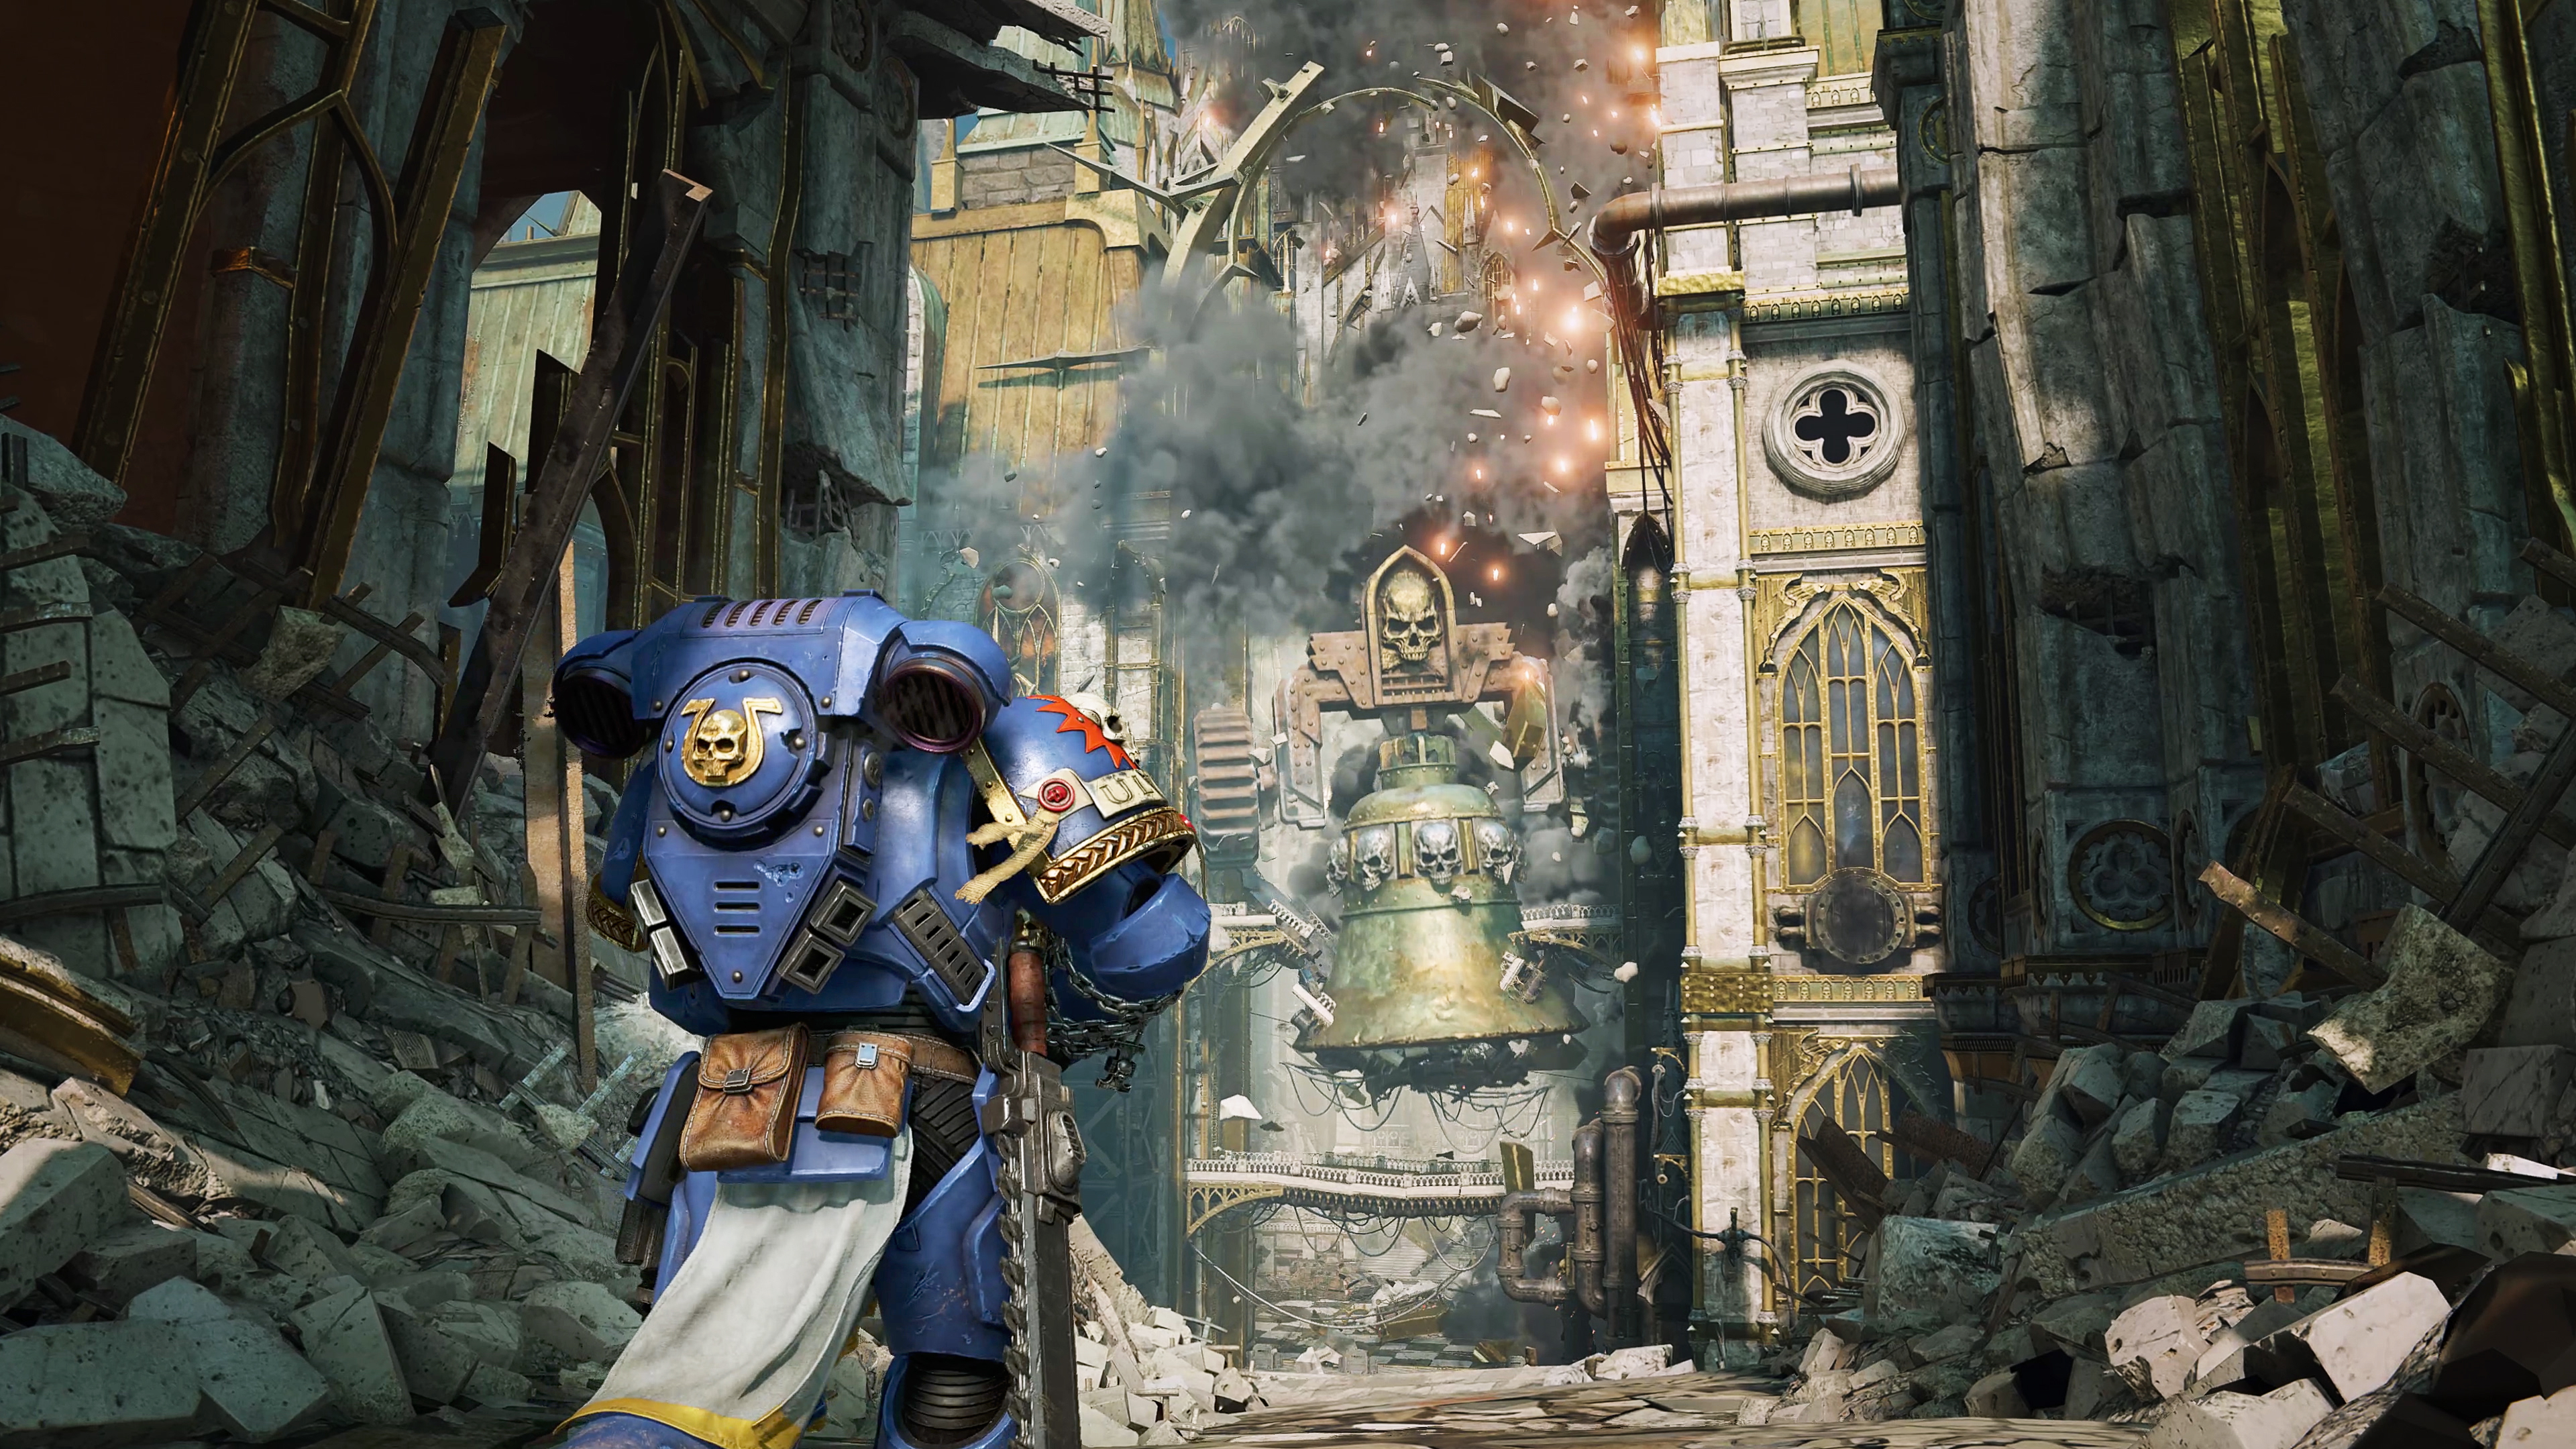  Space Marine 2 devs: 'This war isn't just in front of you, it's all the way up to the horizon' 